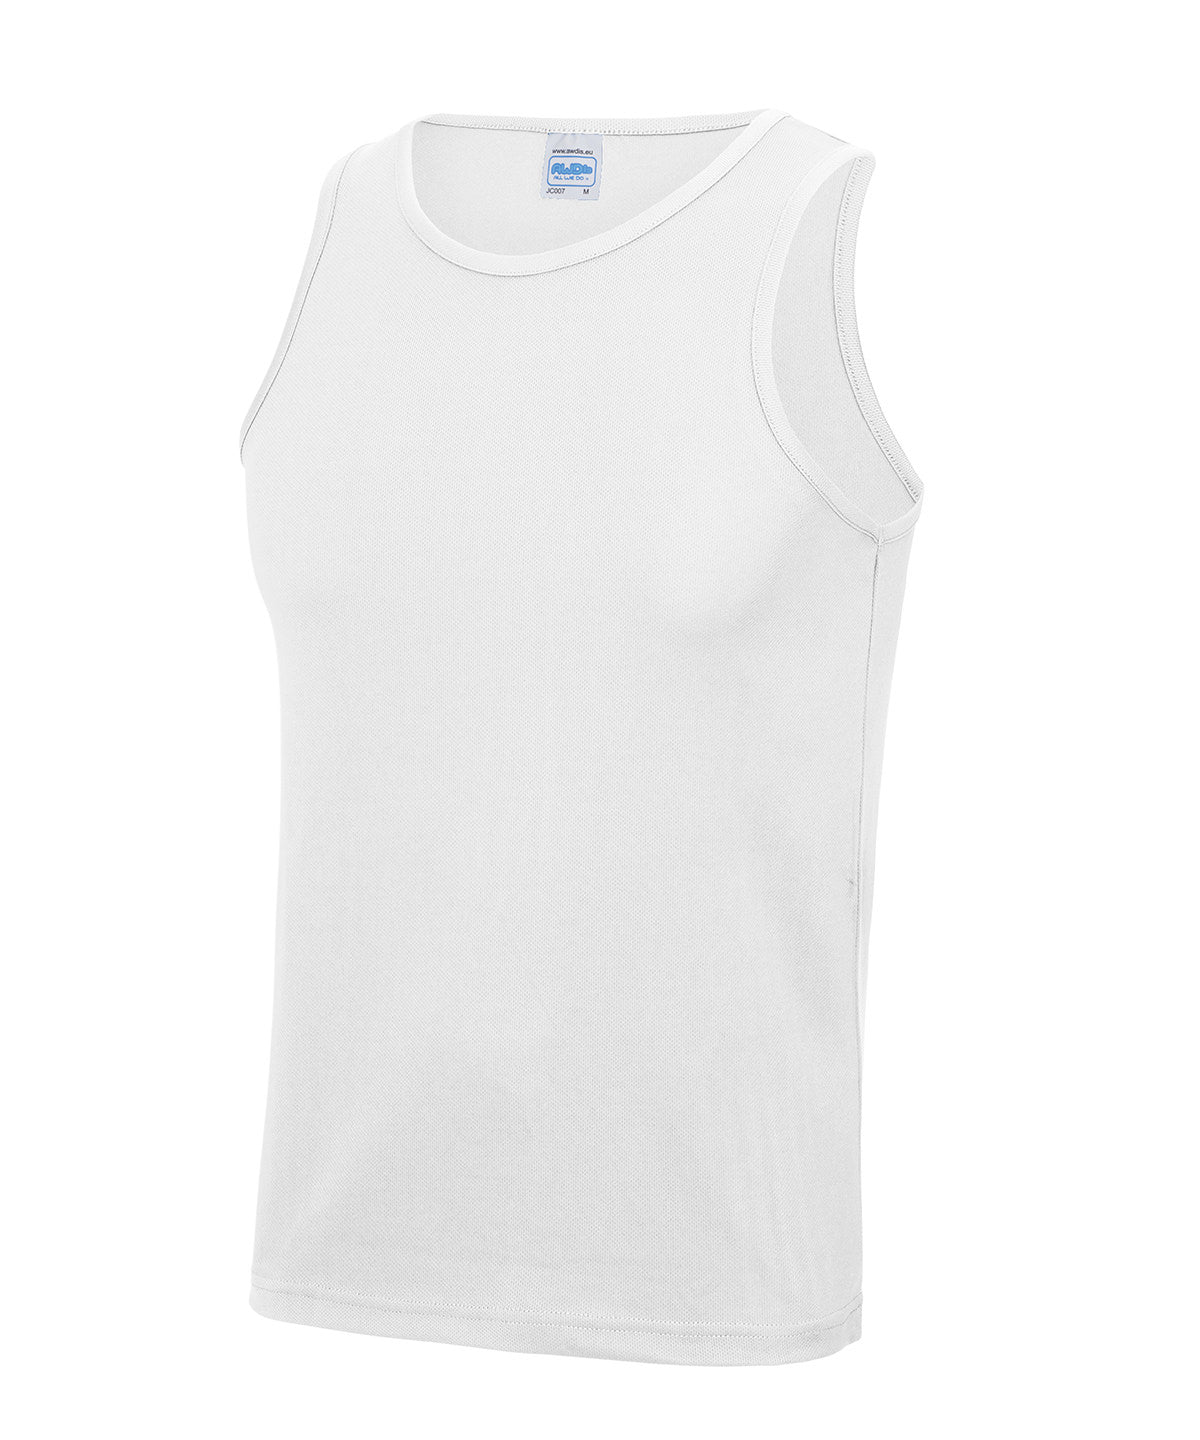 Personalised Vests - White AWDis Just Cool Cool vest